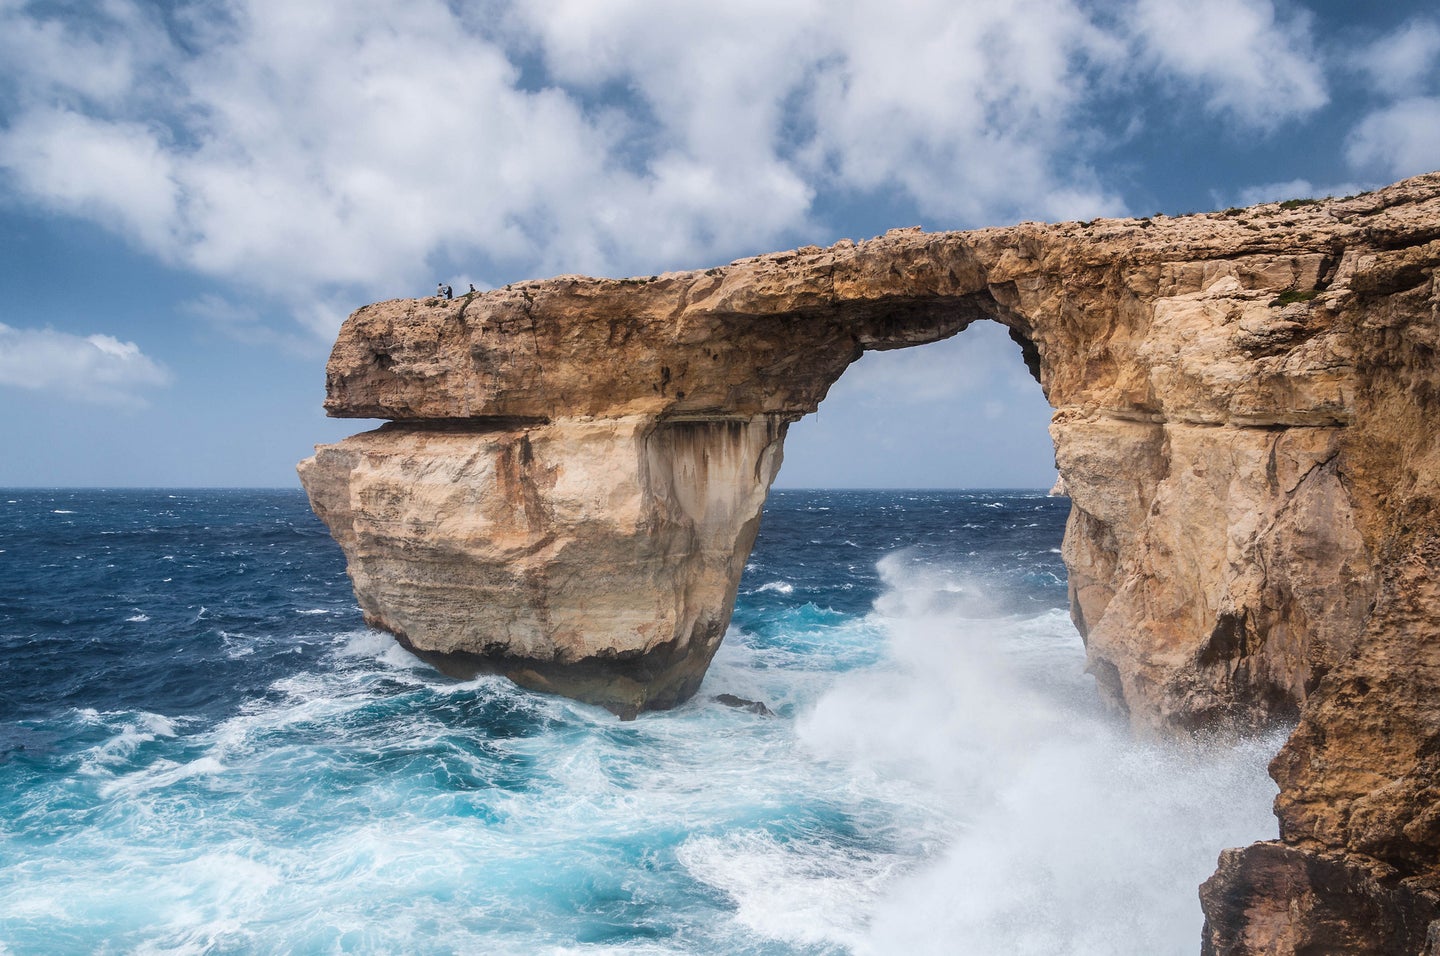 Breakthroughs, stardom, and collapse: the life cycle of a sea arch